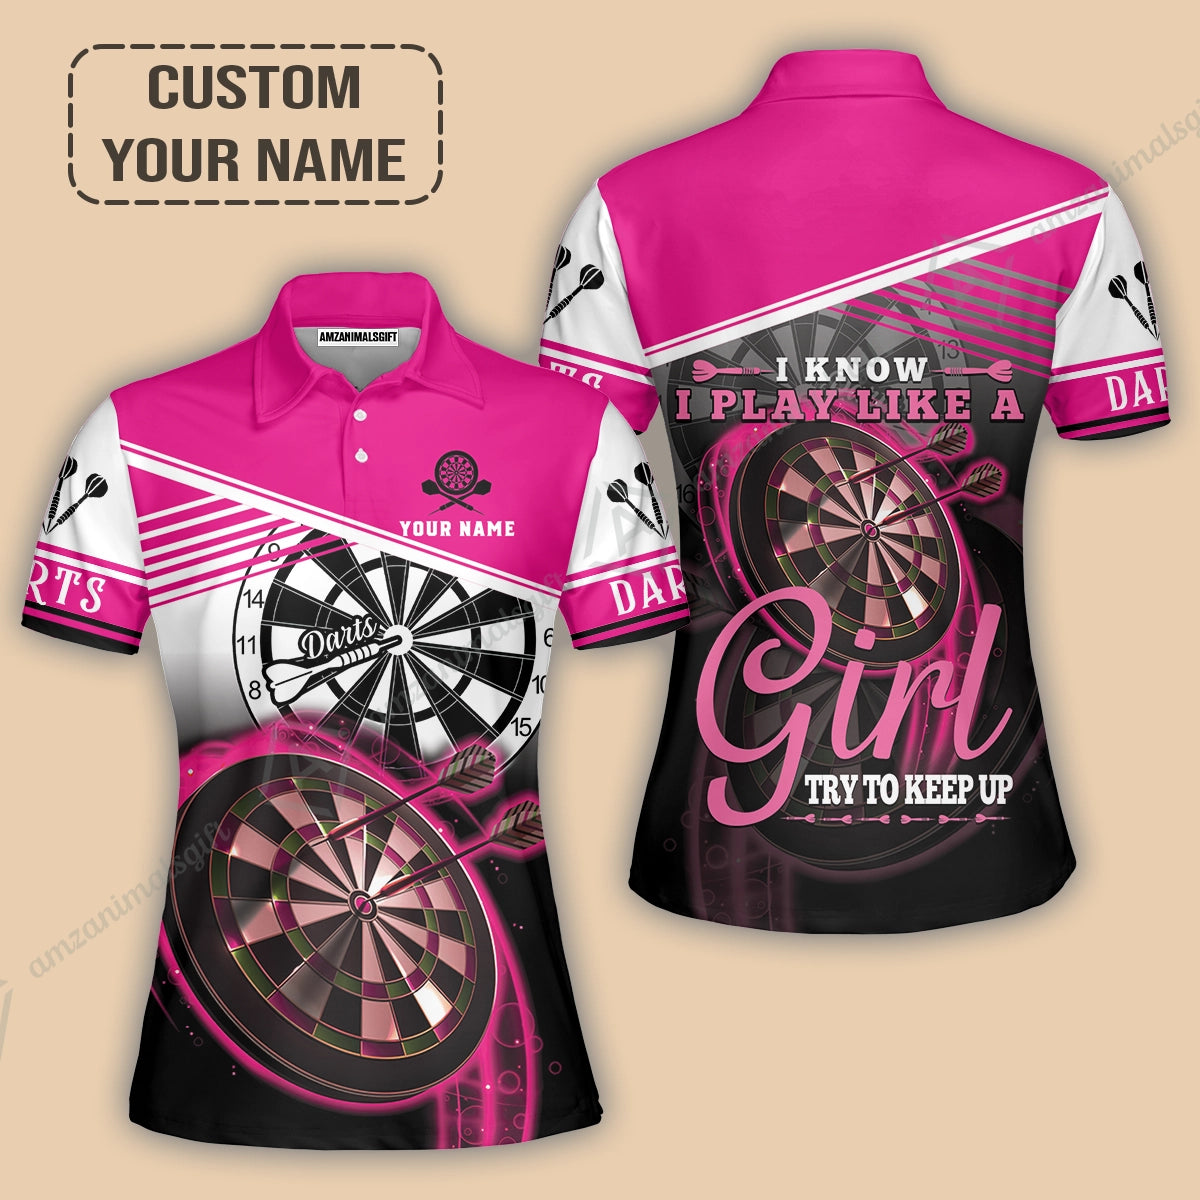 Personalized Darts Women Polo Shirt, Darts Pink Color Shirt I Know I Play Like A Girl Try To Keep Up, Outfits For Darts Players, Darts Team